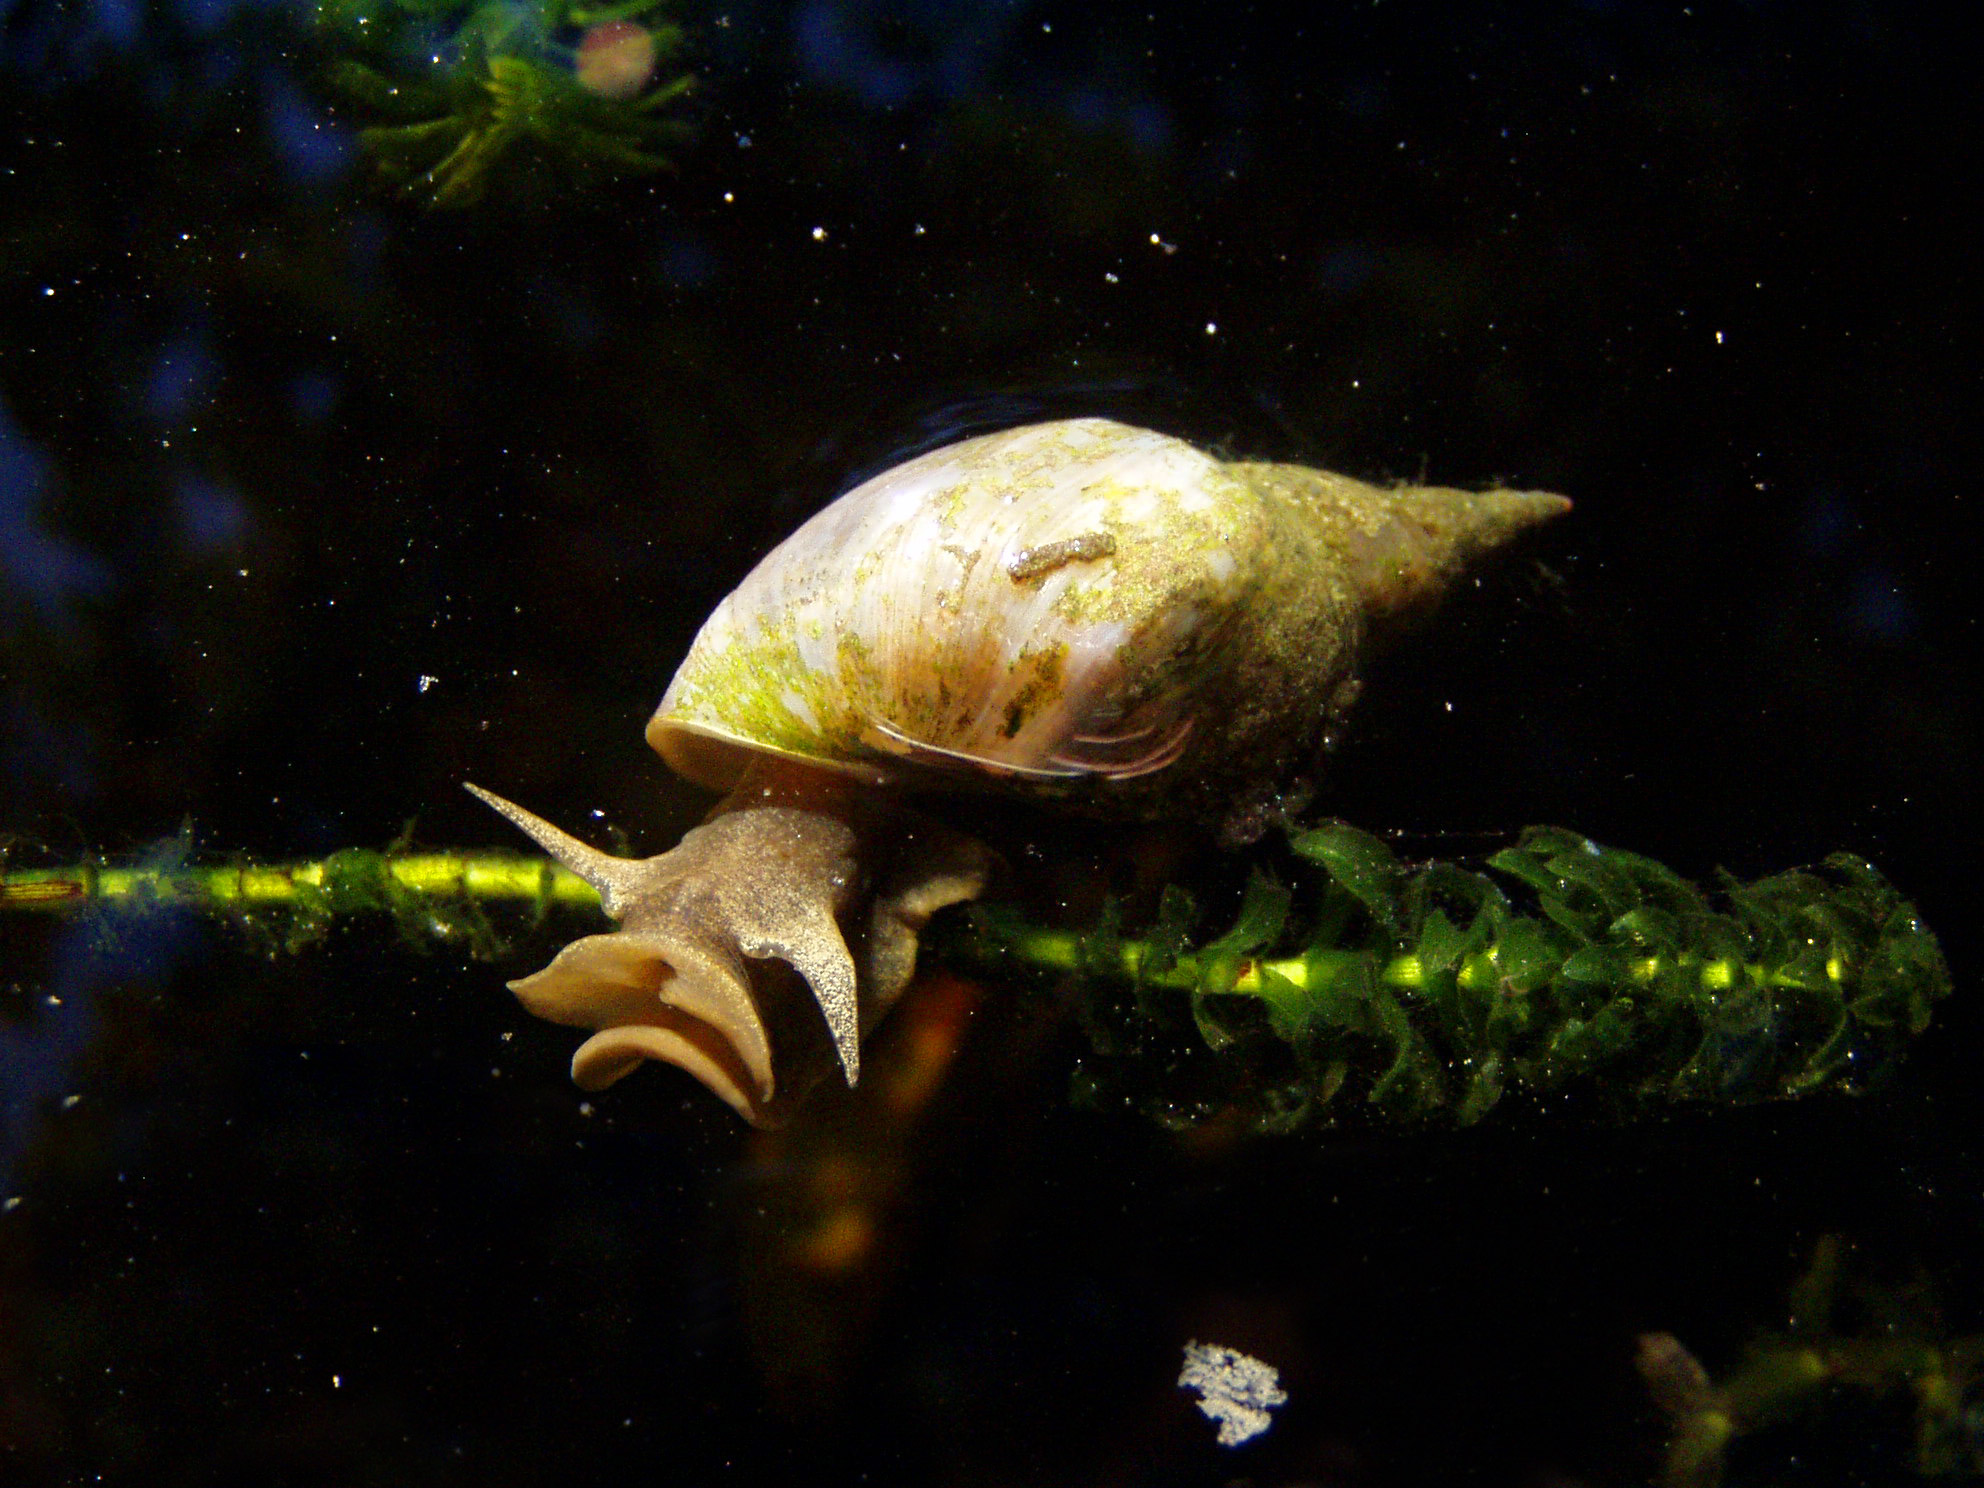 Scientists Force Snails To Exercise To See If It Affects Their Decision-Making Skills